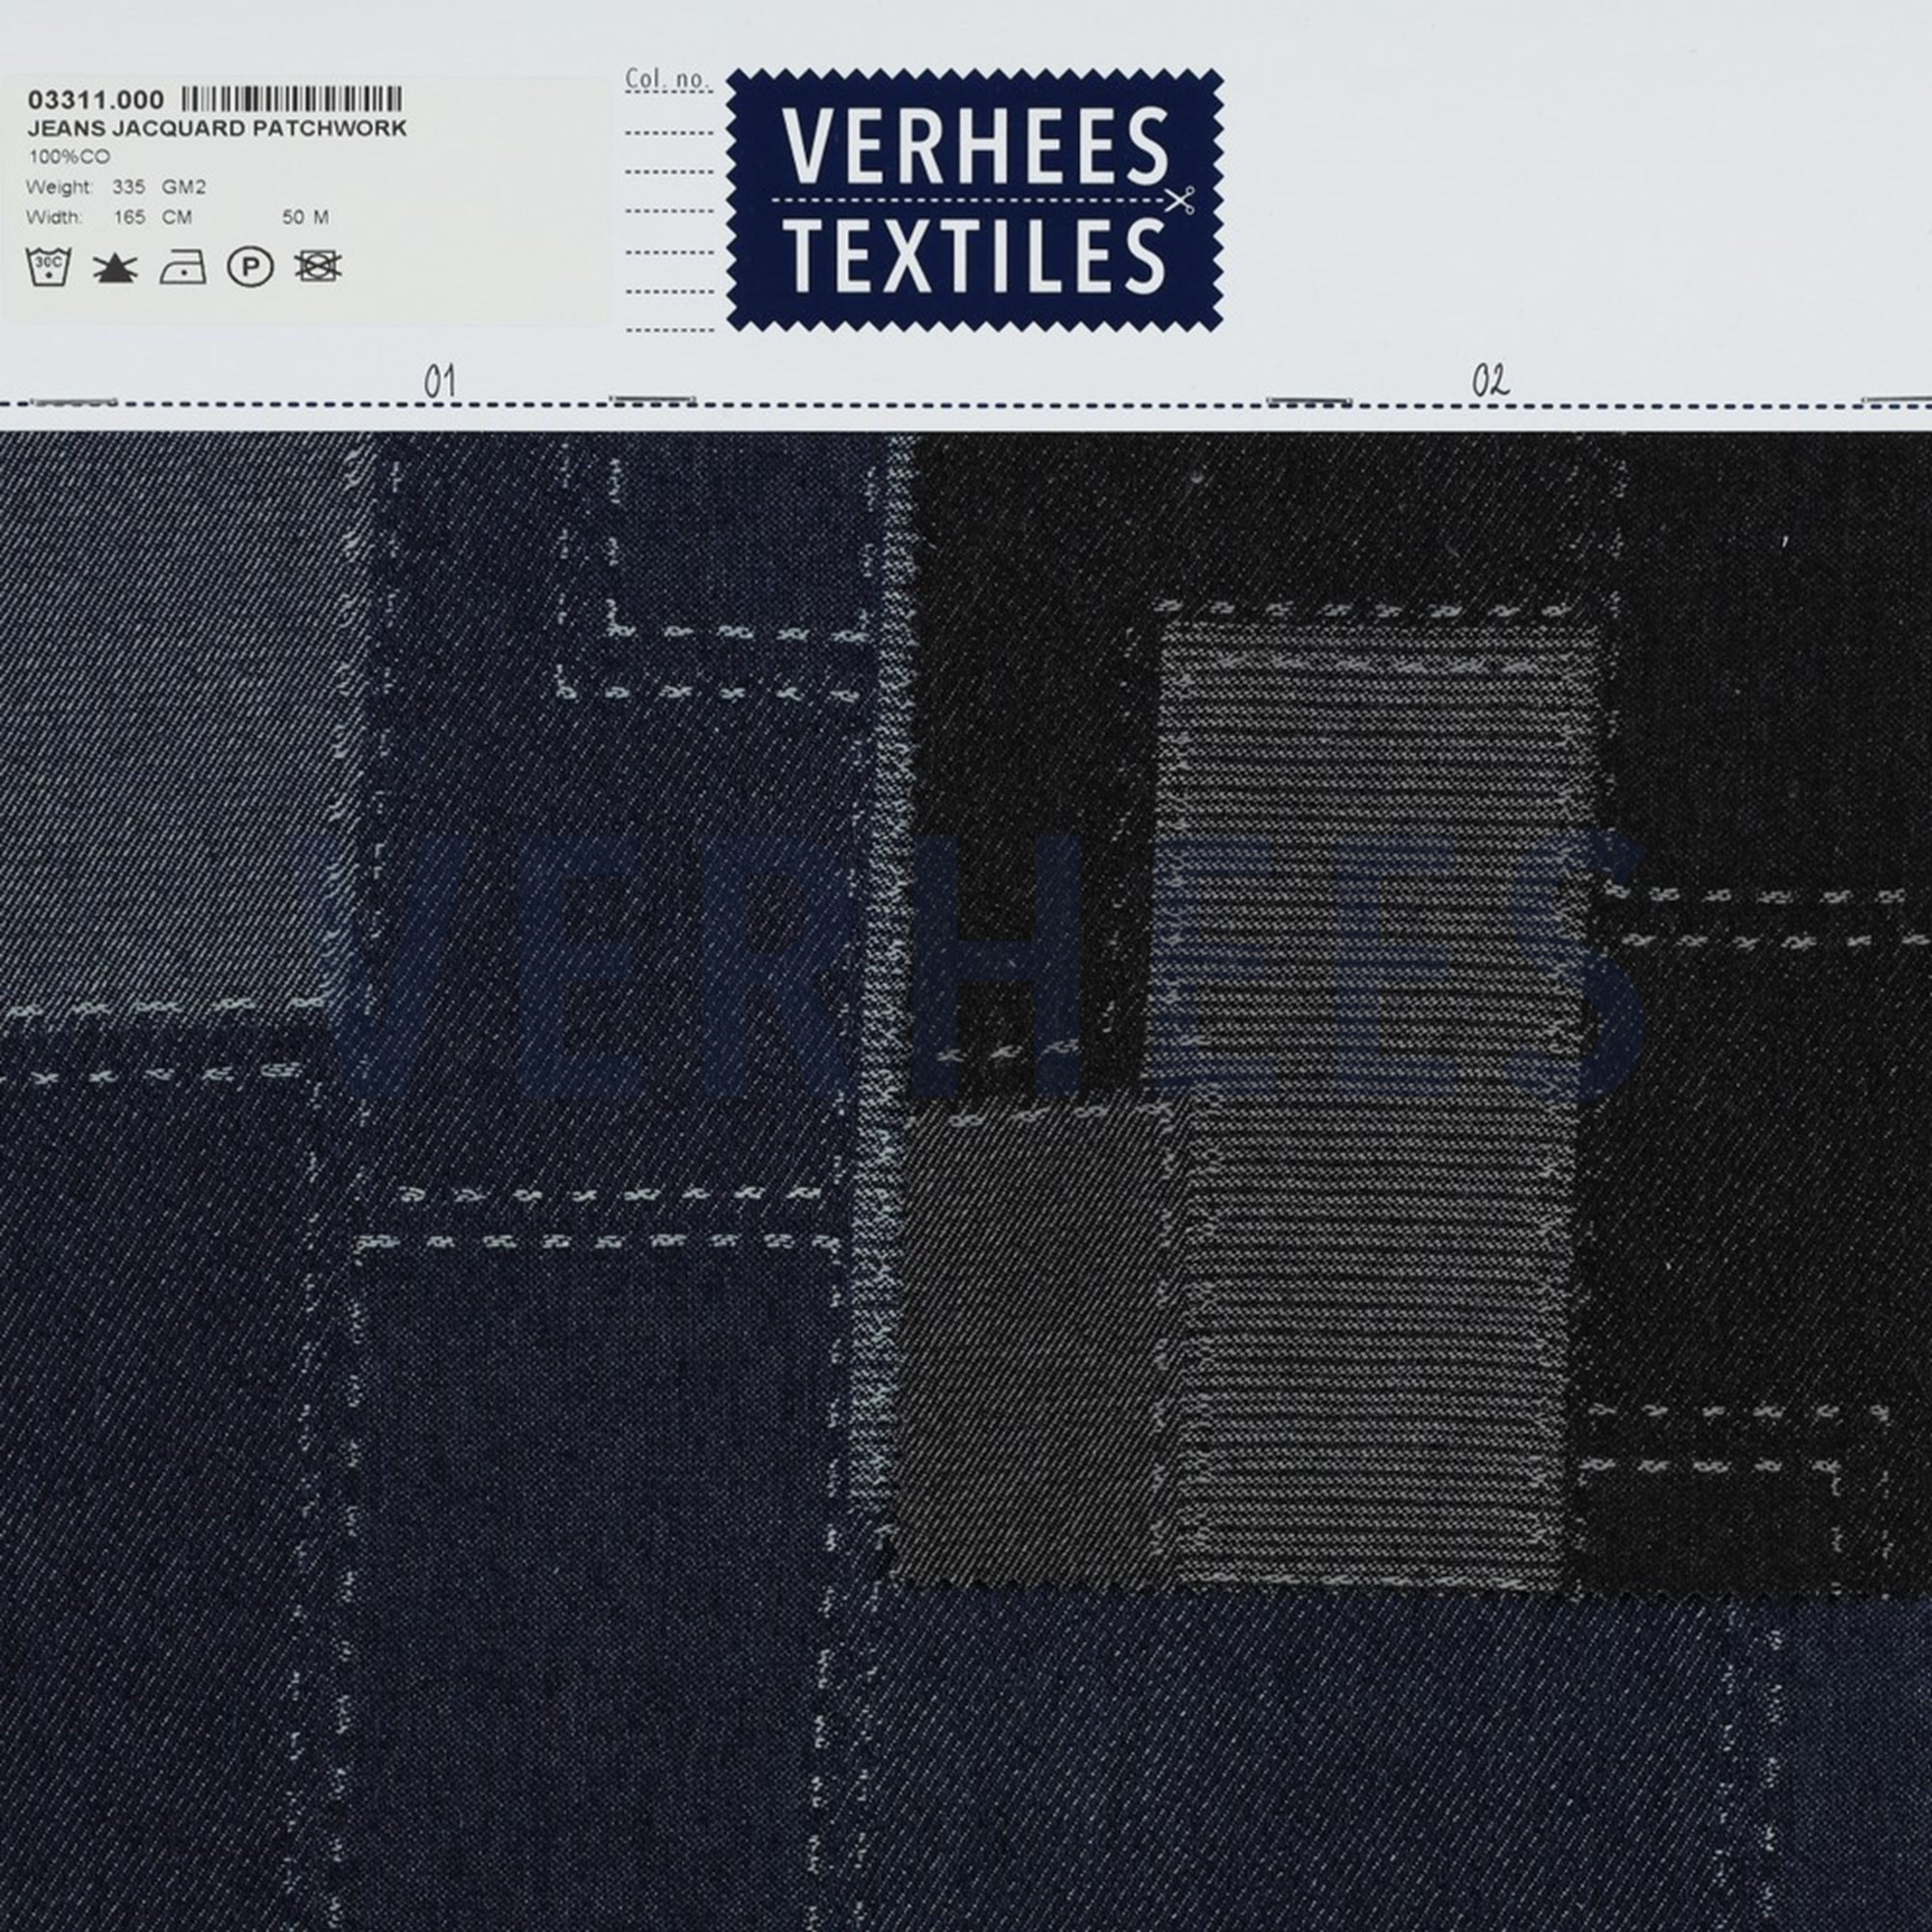 JEANS JACQUARD PATCHWORK JEANS (high resolution) #4